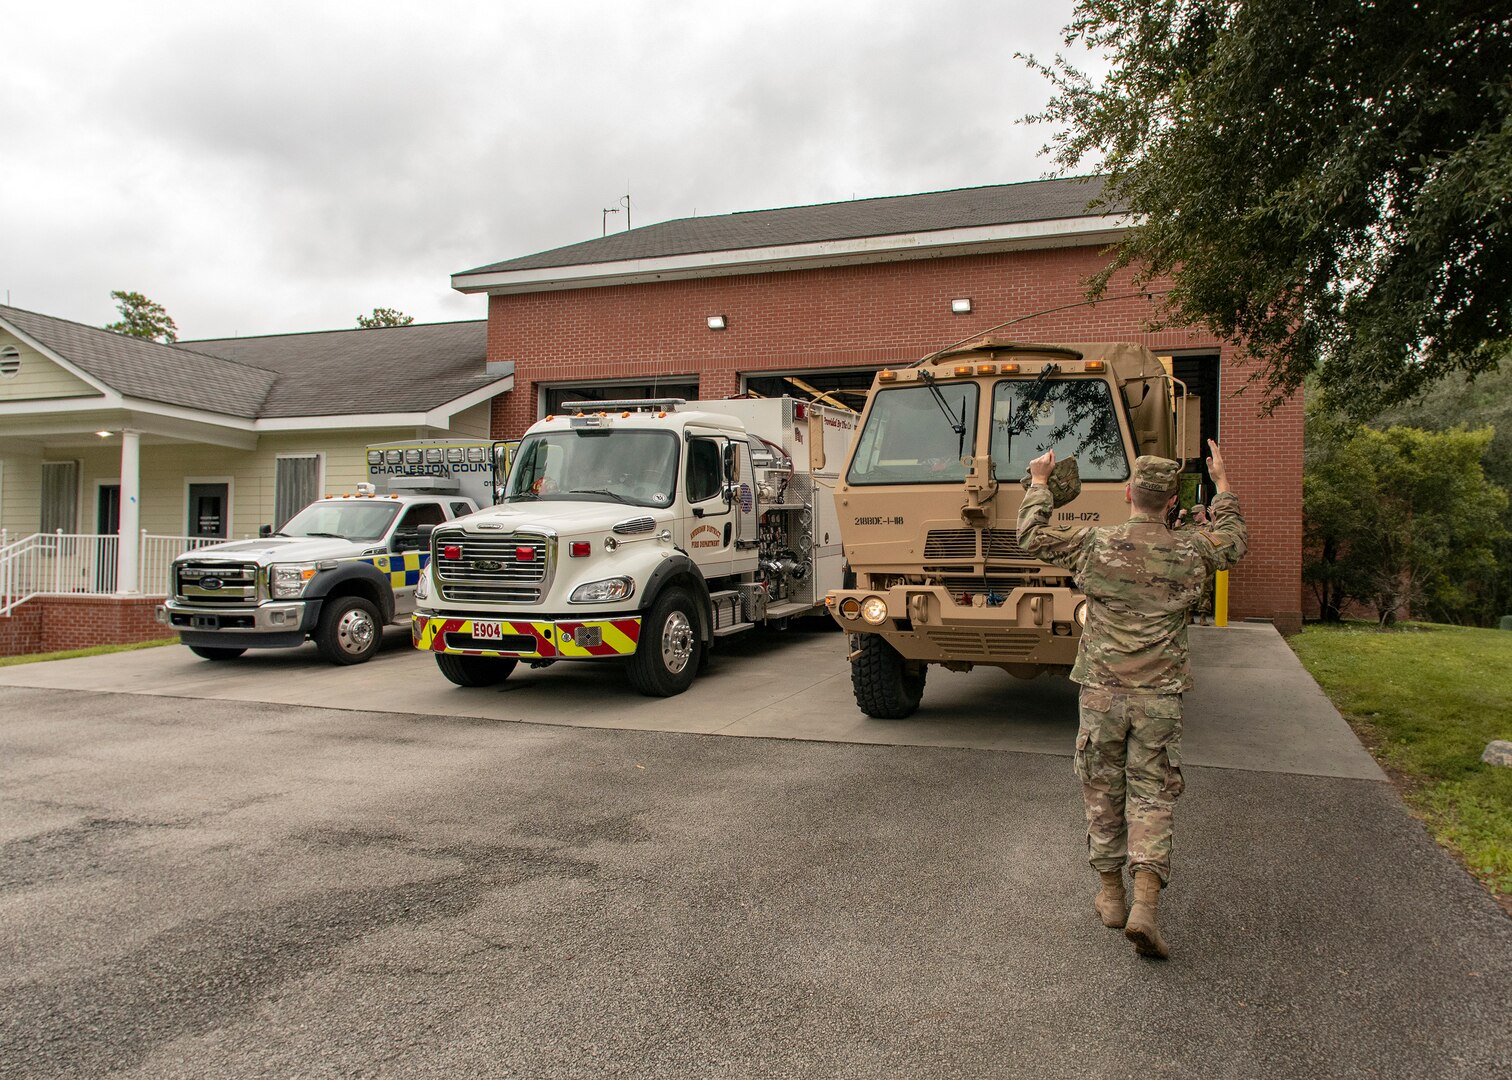 Soldiers with the 1-118th Infantry Battalion stage a Light Medium Tactical Vehicle (LMTV) at the McClellanville Fire Department ahead of Hurricane Florence, Sept. 13, 2018, McClellanville, South Carolina.  Approximately 2,100 Soldiers and Airmen have been mobilized to prepare, respond and participate in recovery efforts for Hurricane Florence.